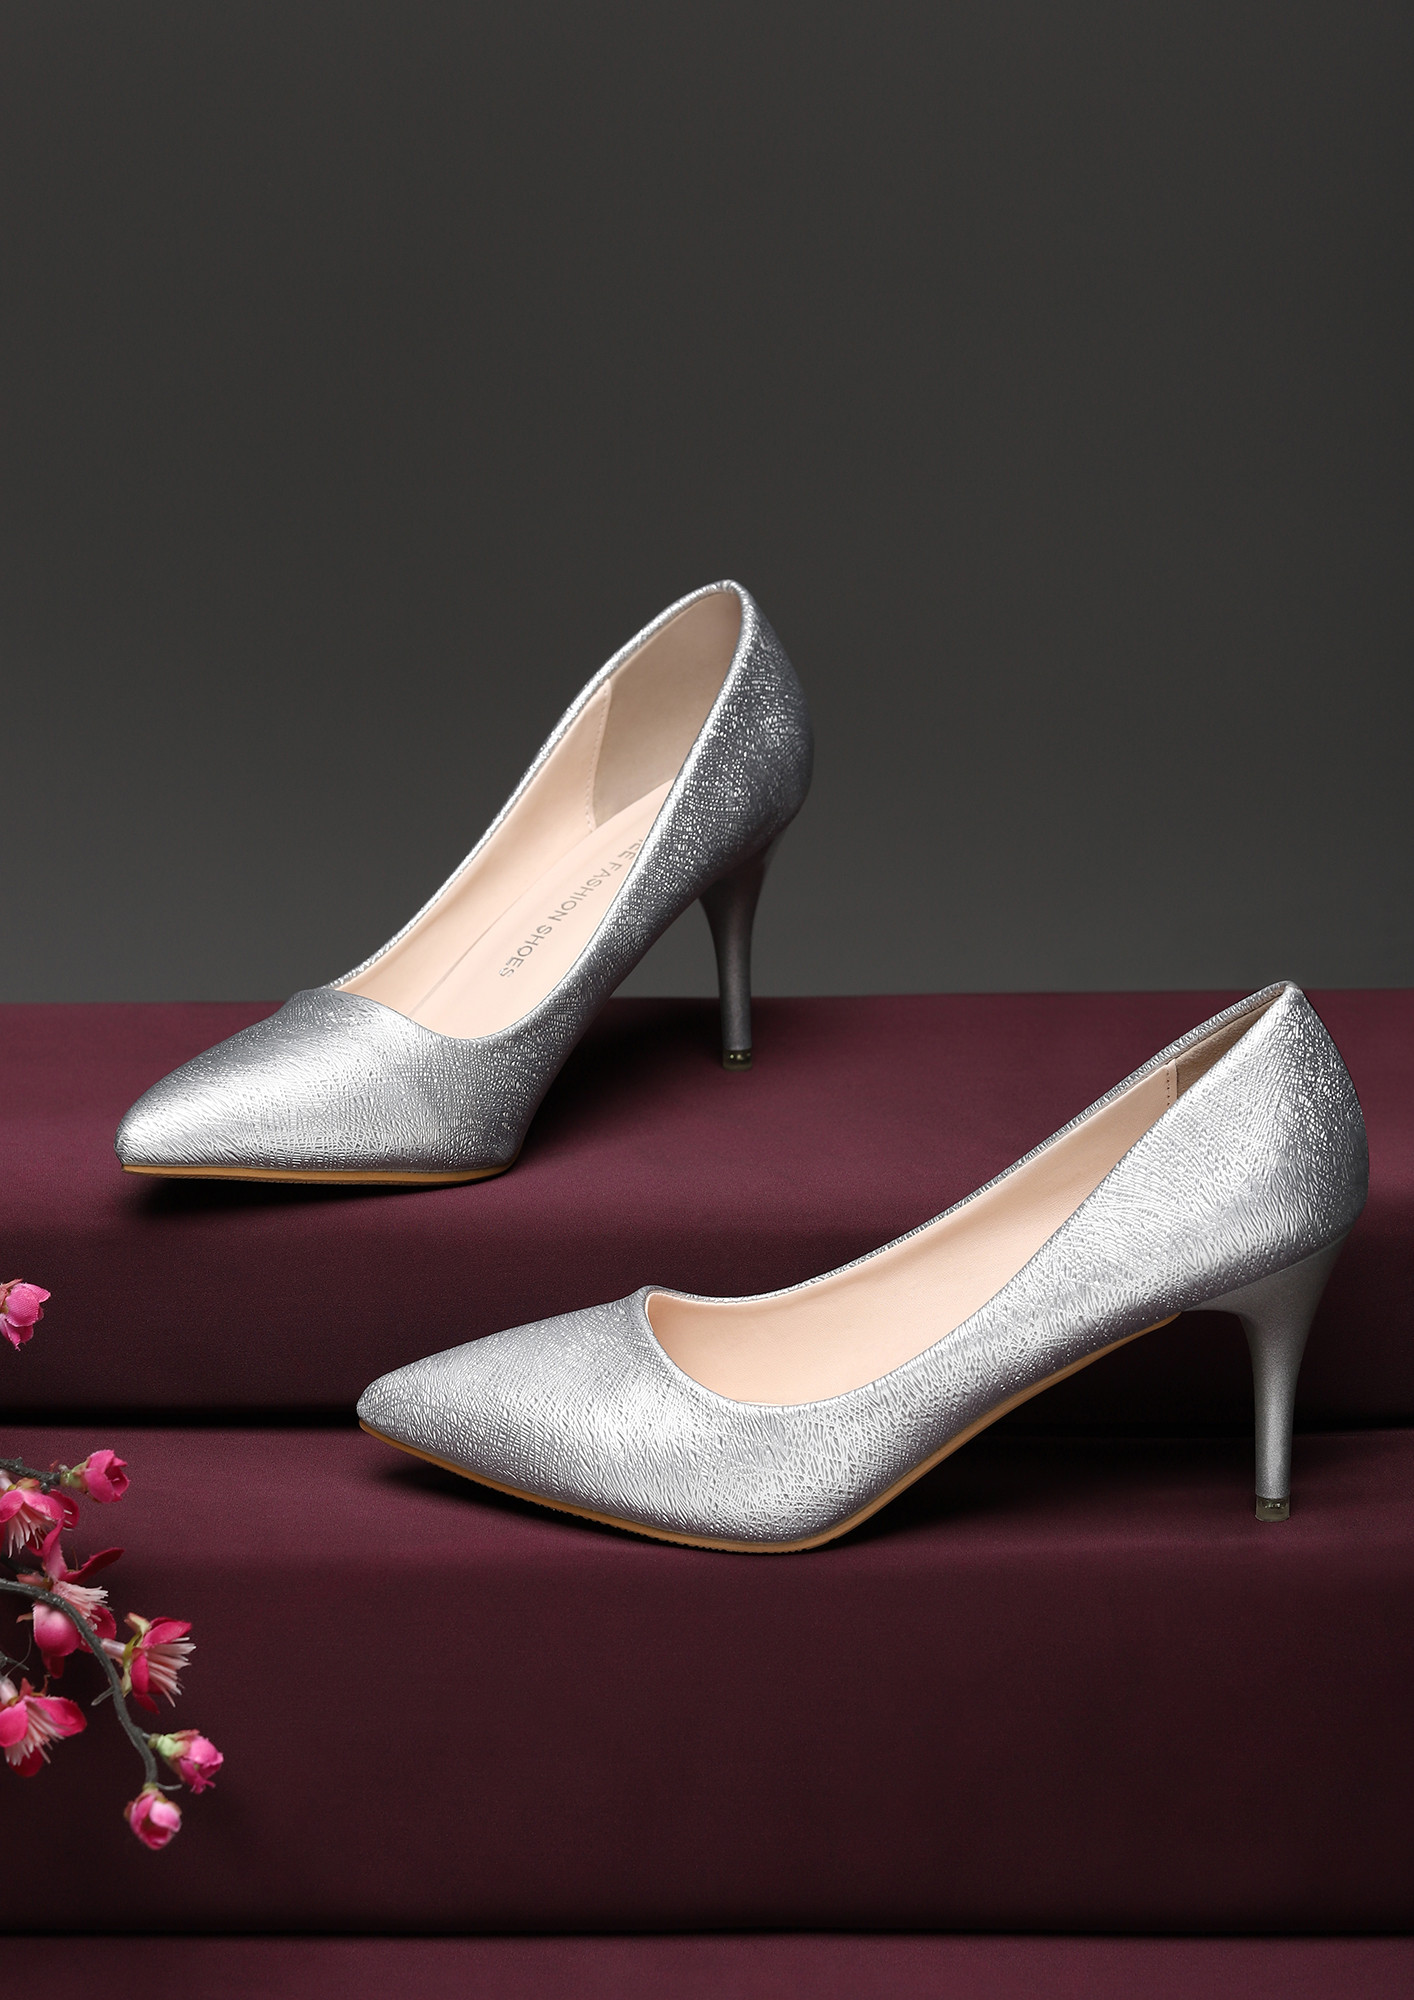 MIXED FEELINGS AND THREADS SILVER PUMPS